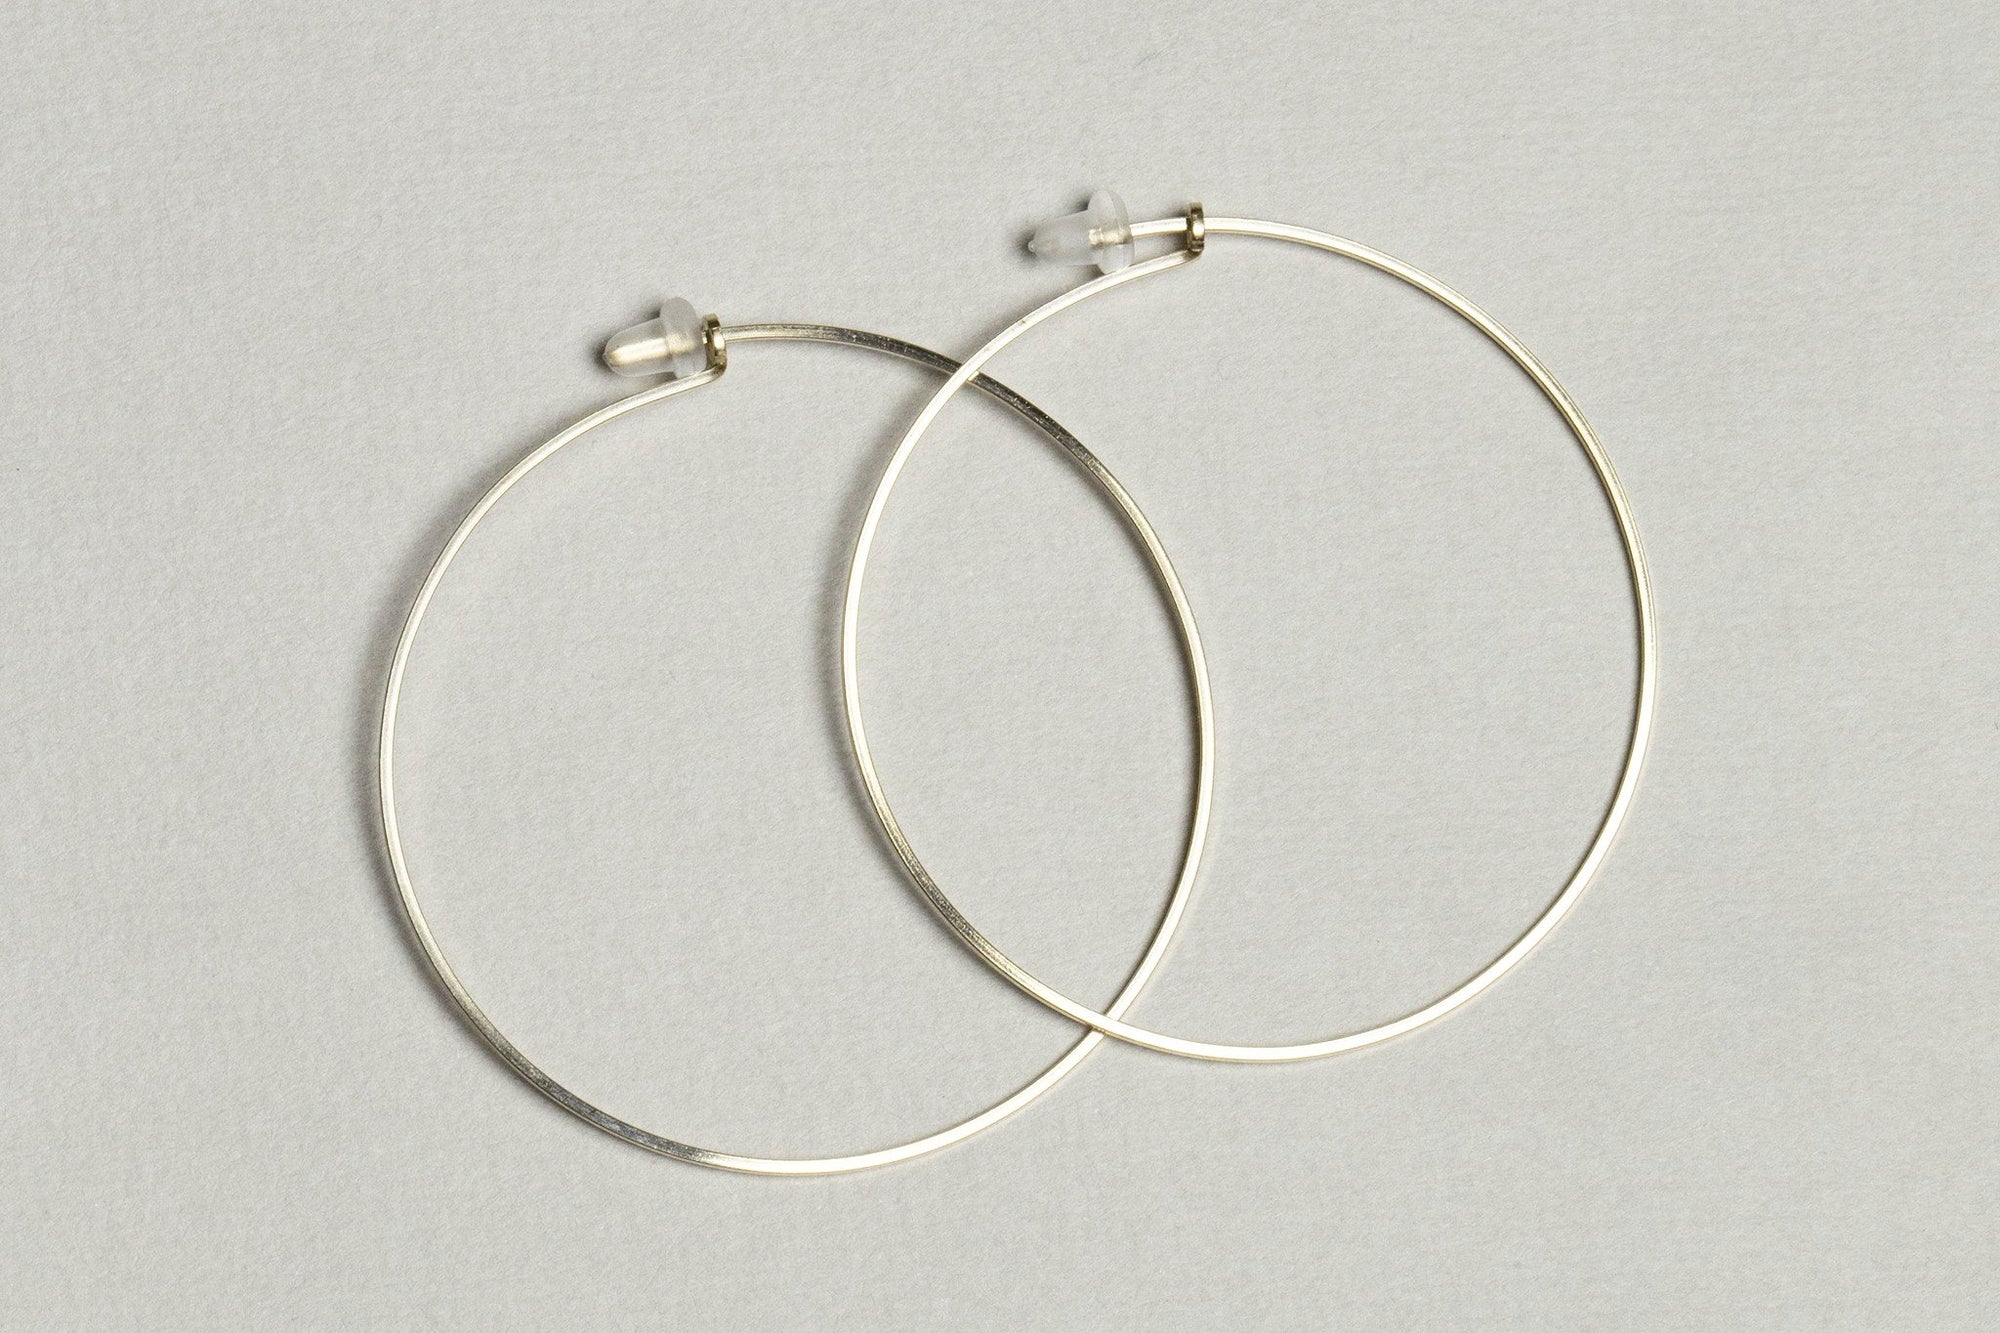 By Boe Simple Small Hoops Made of Gold-Filled Wire